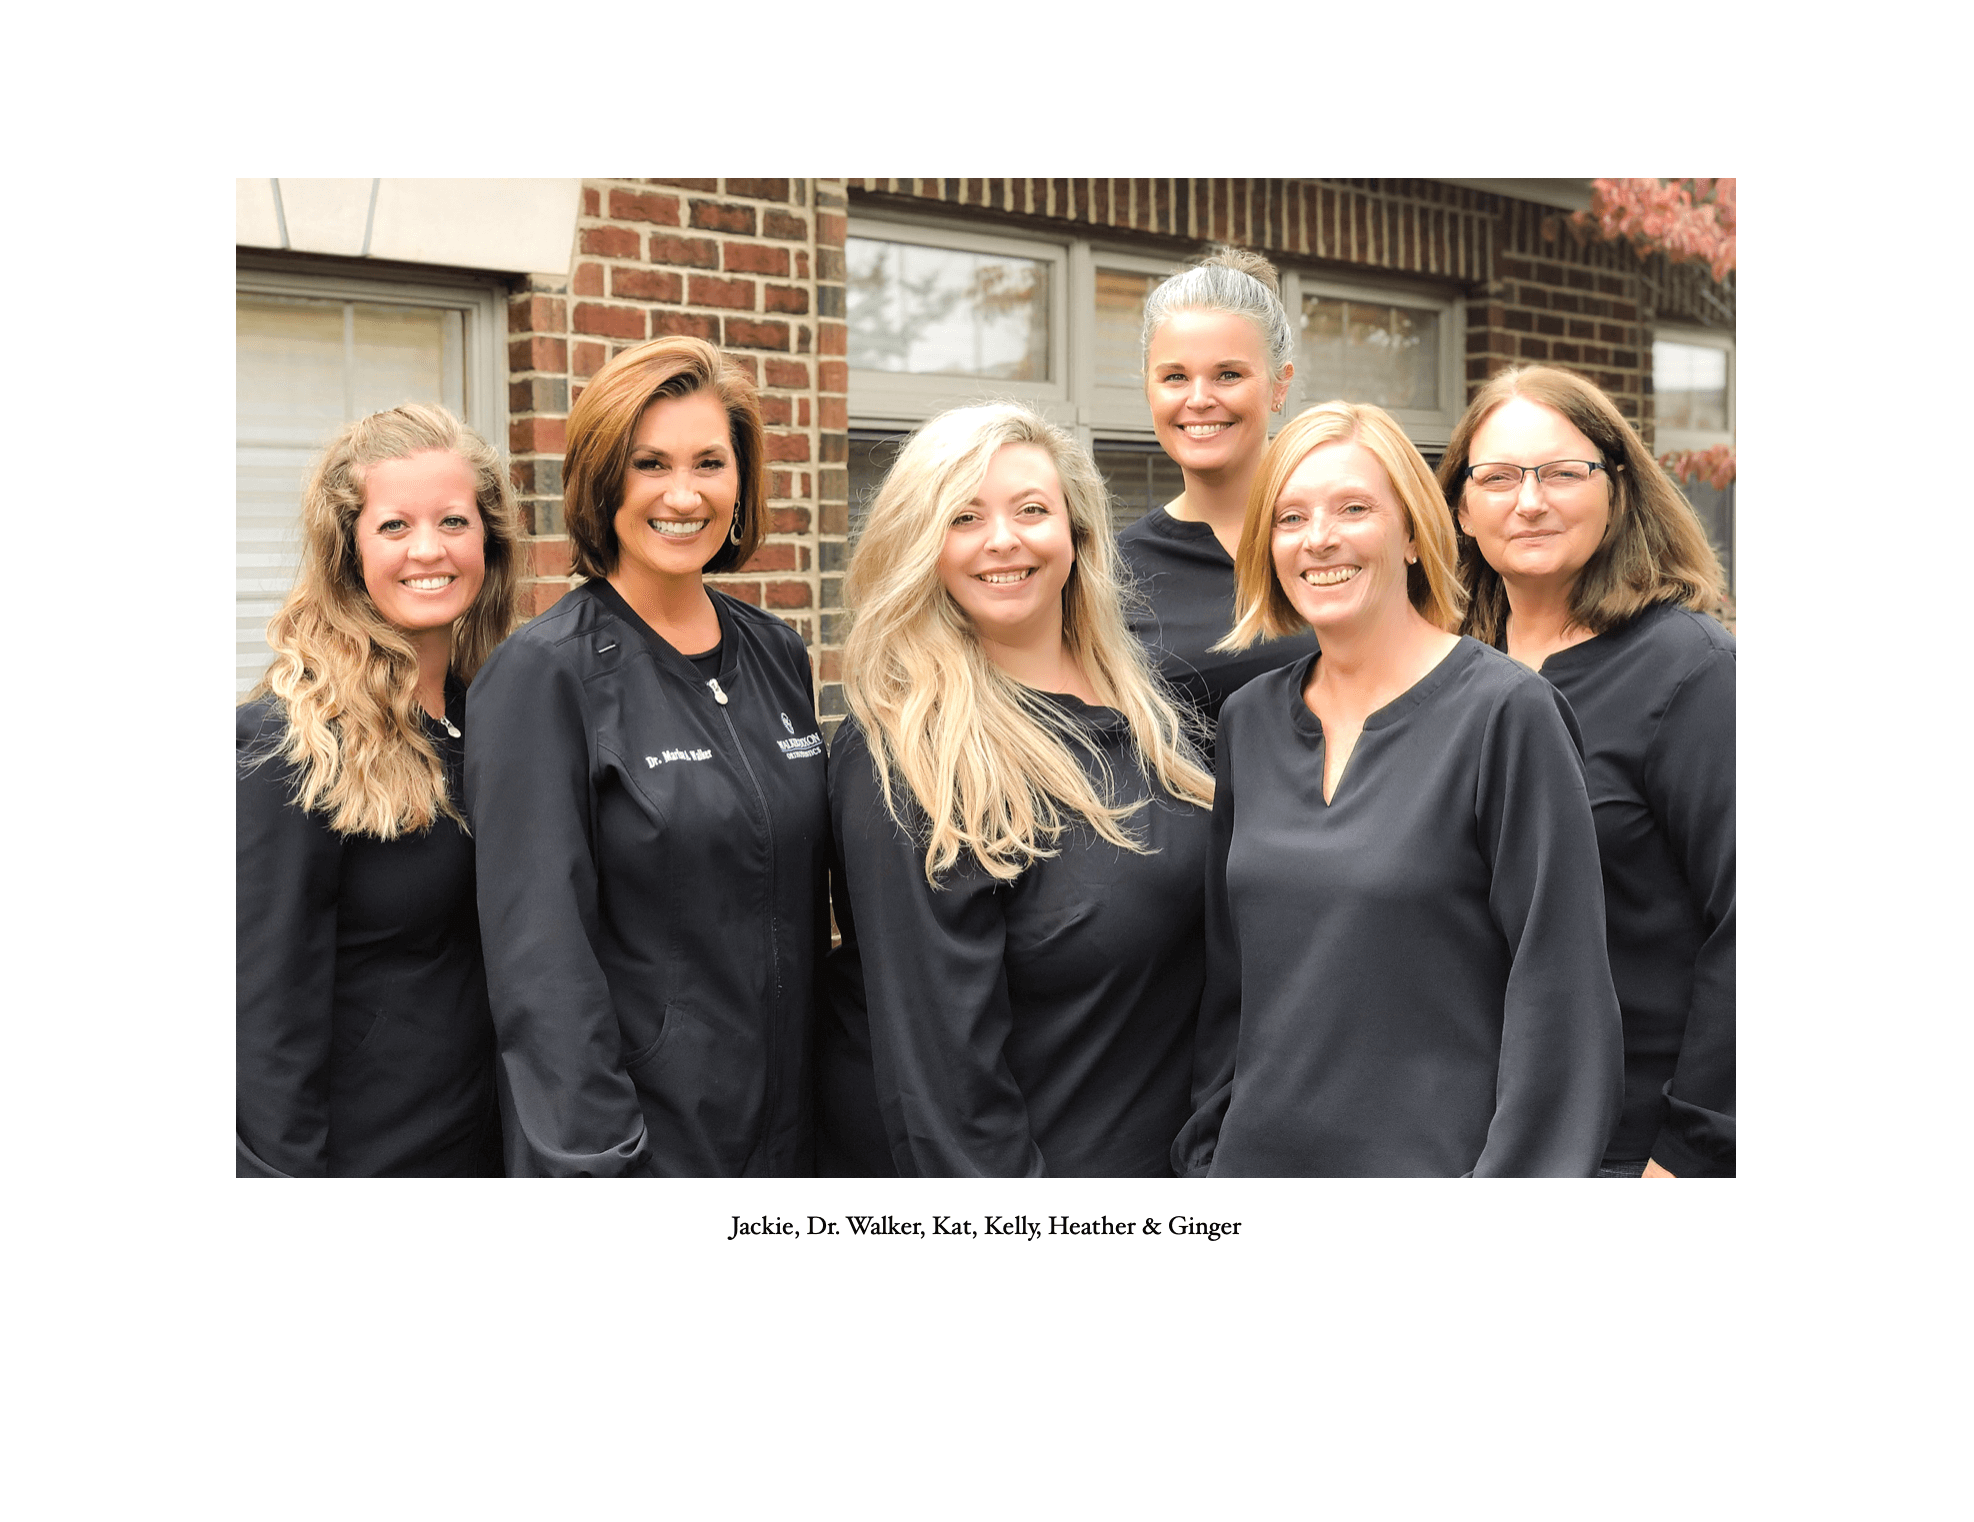 Staff photo with Jackie, Dr. Walker, Kat, Kelly, Heather and Ginger